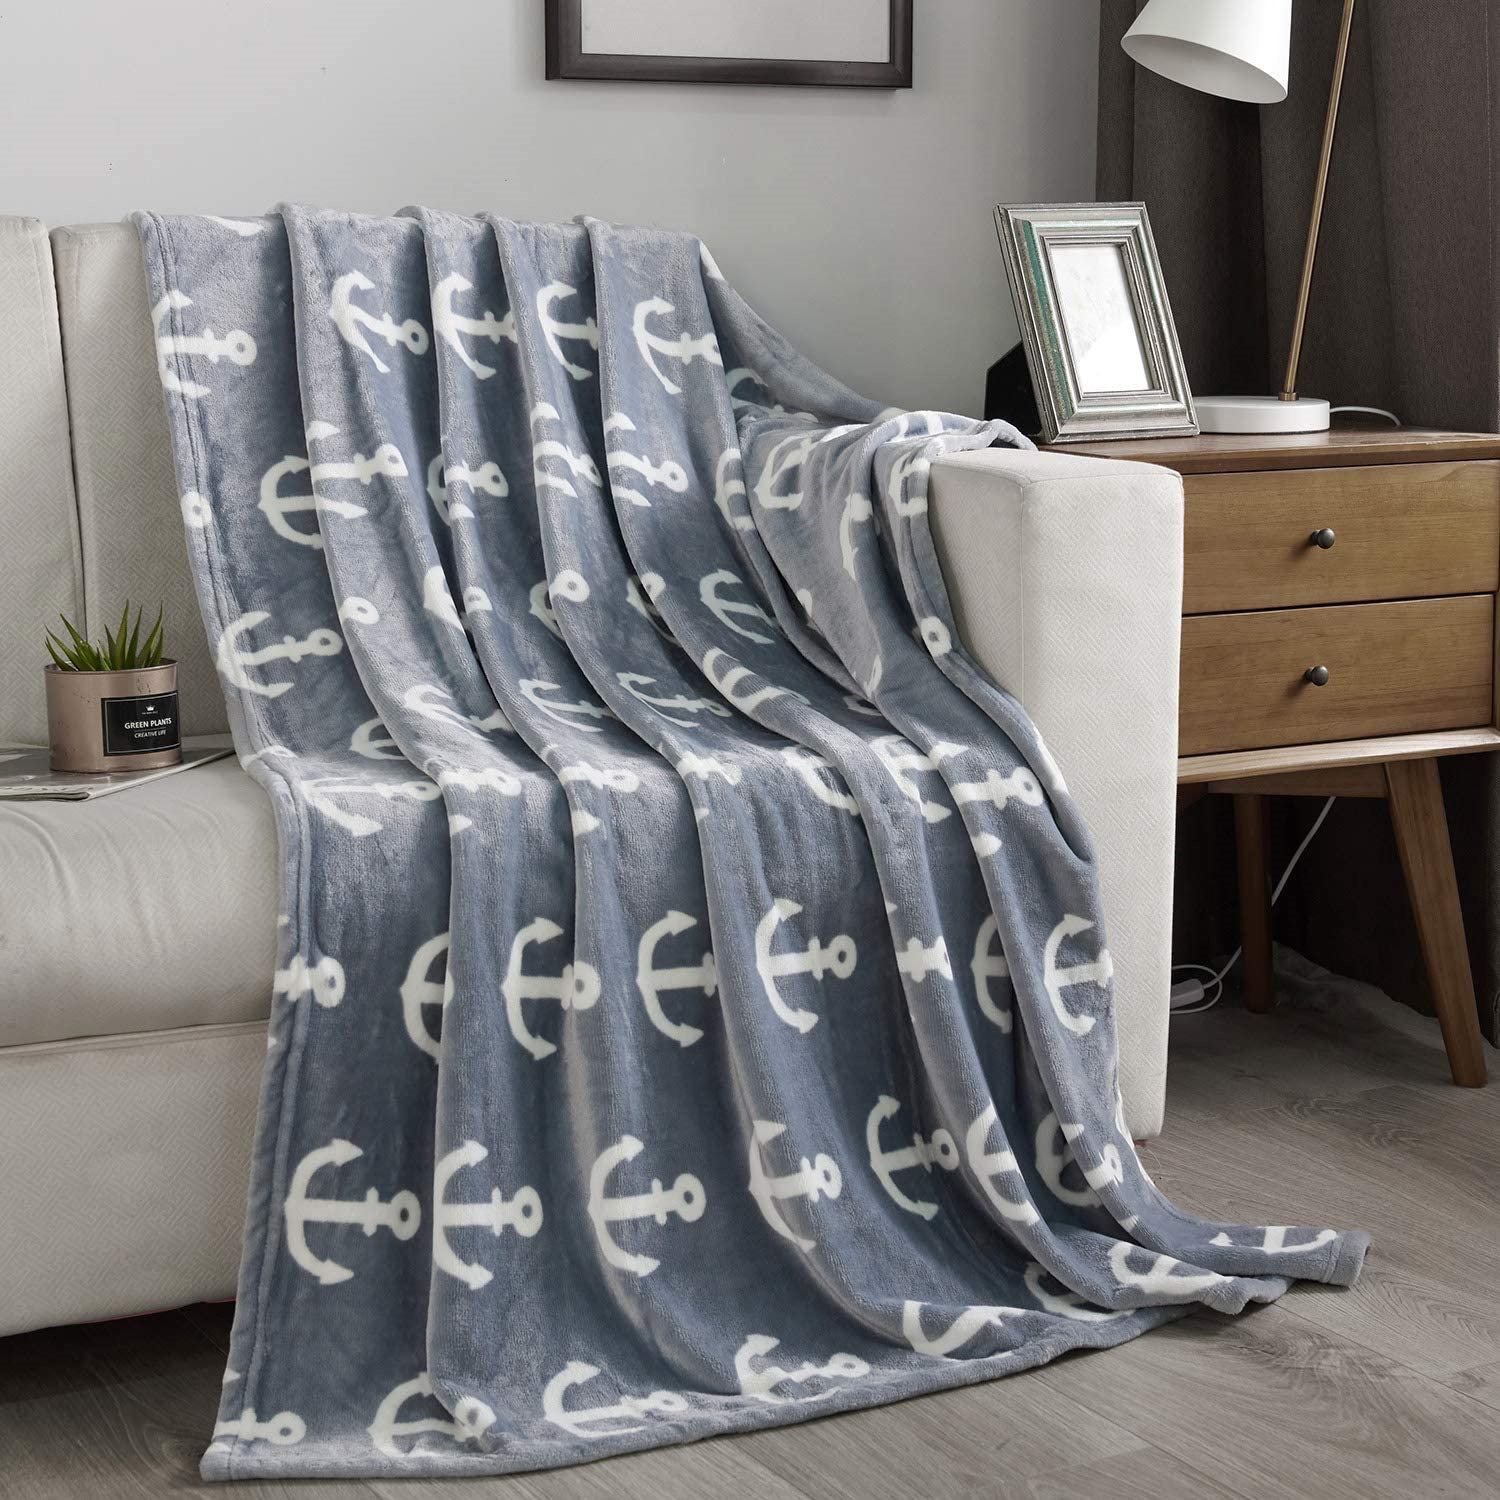 Warm and Comfortable Blanket Gifts（1） Cars Pretty Happy Halloween Printed Blanket 10 All-Season Microfiber Flannel Super Soft Suitable for Sofas Living Rooms Lightweight 